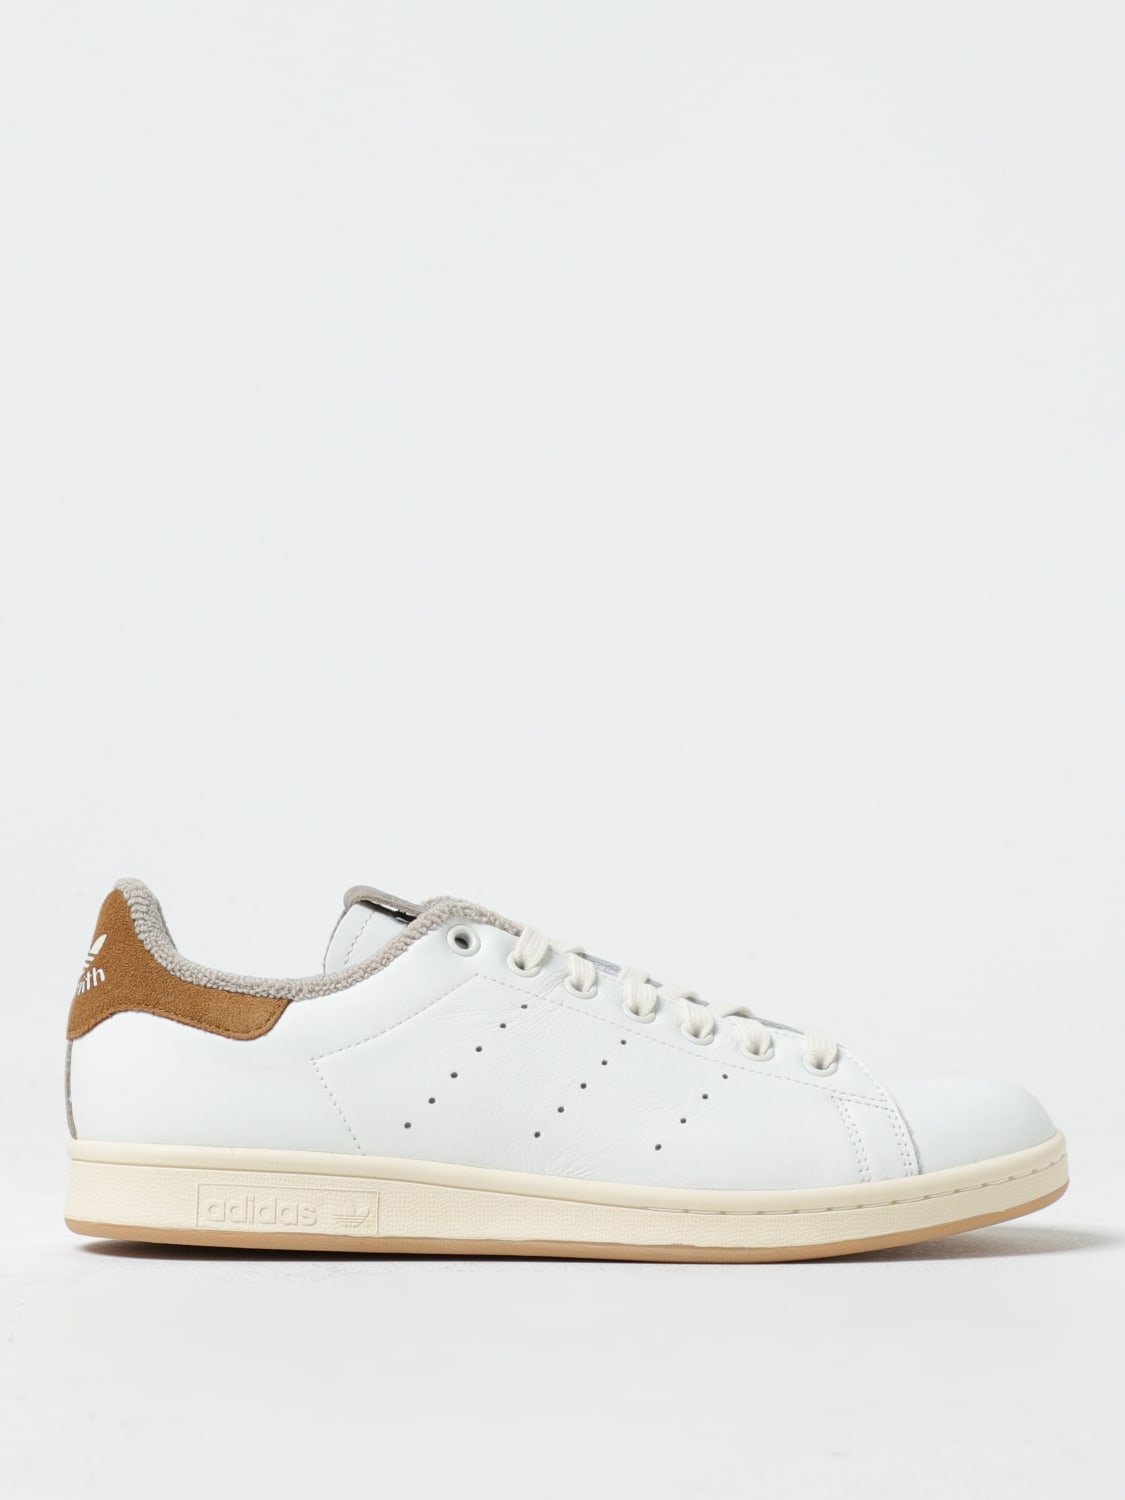 ADIDAS ORIGINALS: Stan Smith sneakers in ID2031 Adidas - Originals at leather | sneakers White online